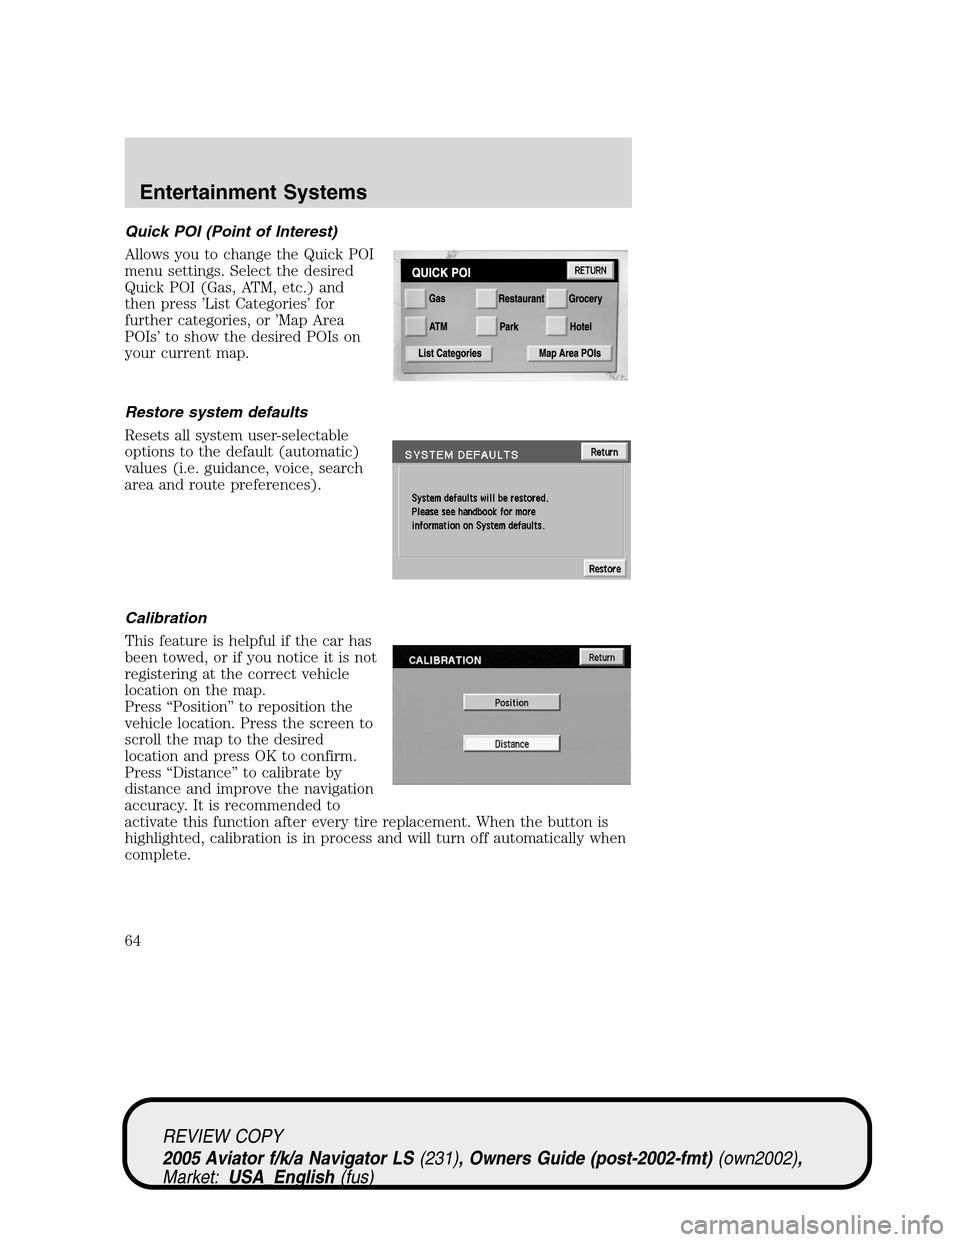 LINCOLN AVIATOR 2005 Repair Manual Quick POI (Point of Interest)
Allows you to change the Quick POI
menu settings. Select the desired
Quick POI (Gas, ATM, etc.) and
then press’List Categories’for
further categories, or’Map Area
P